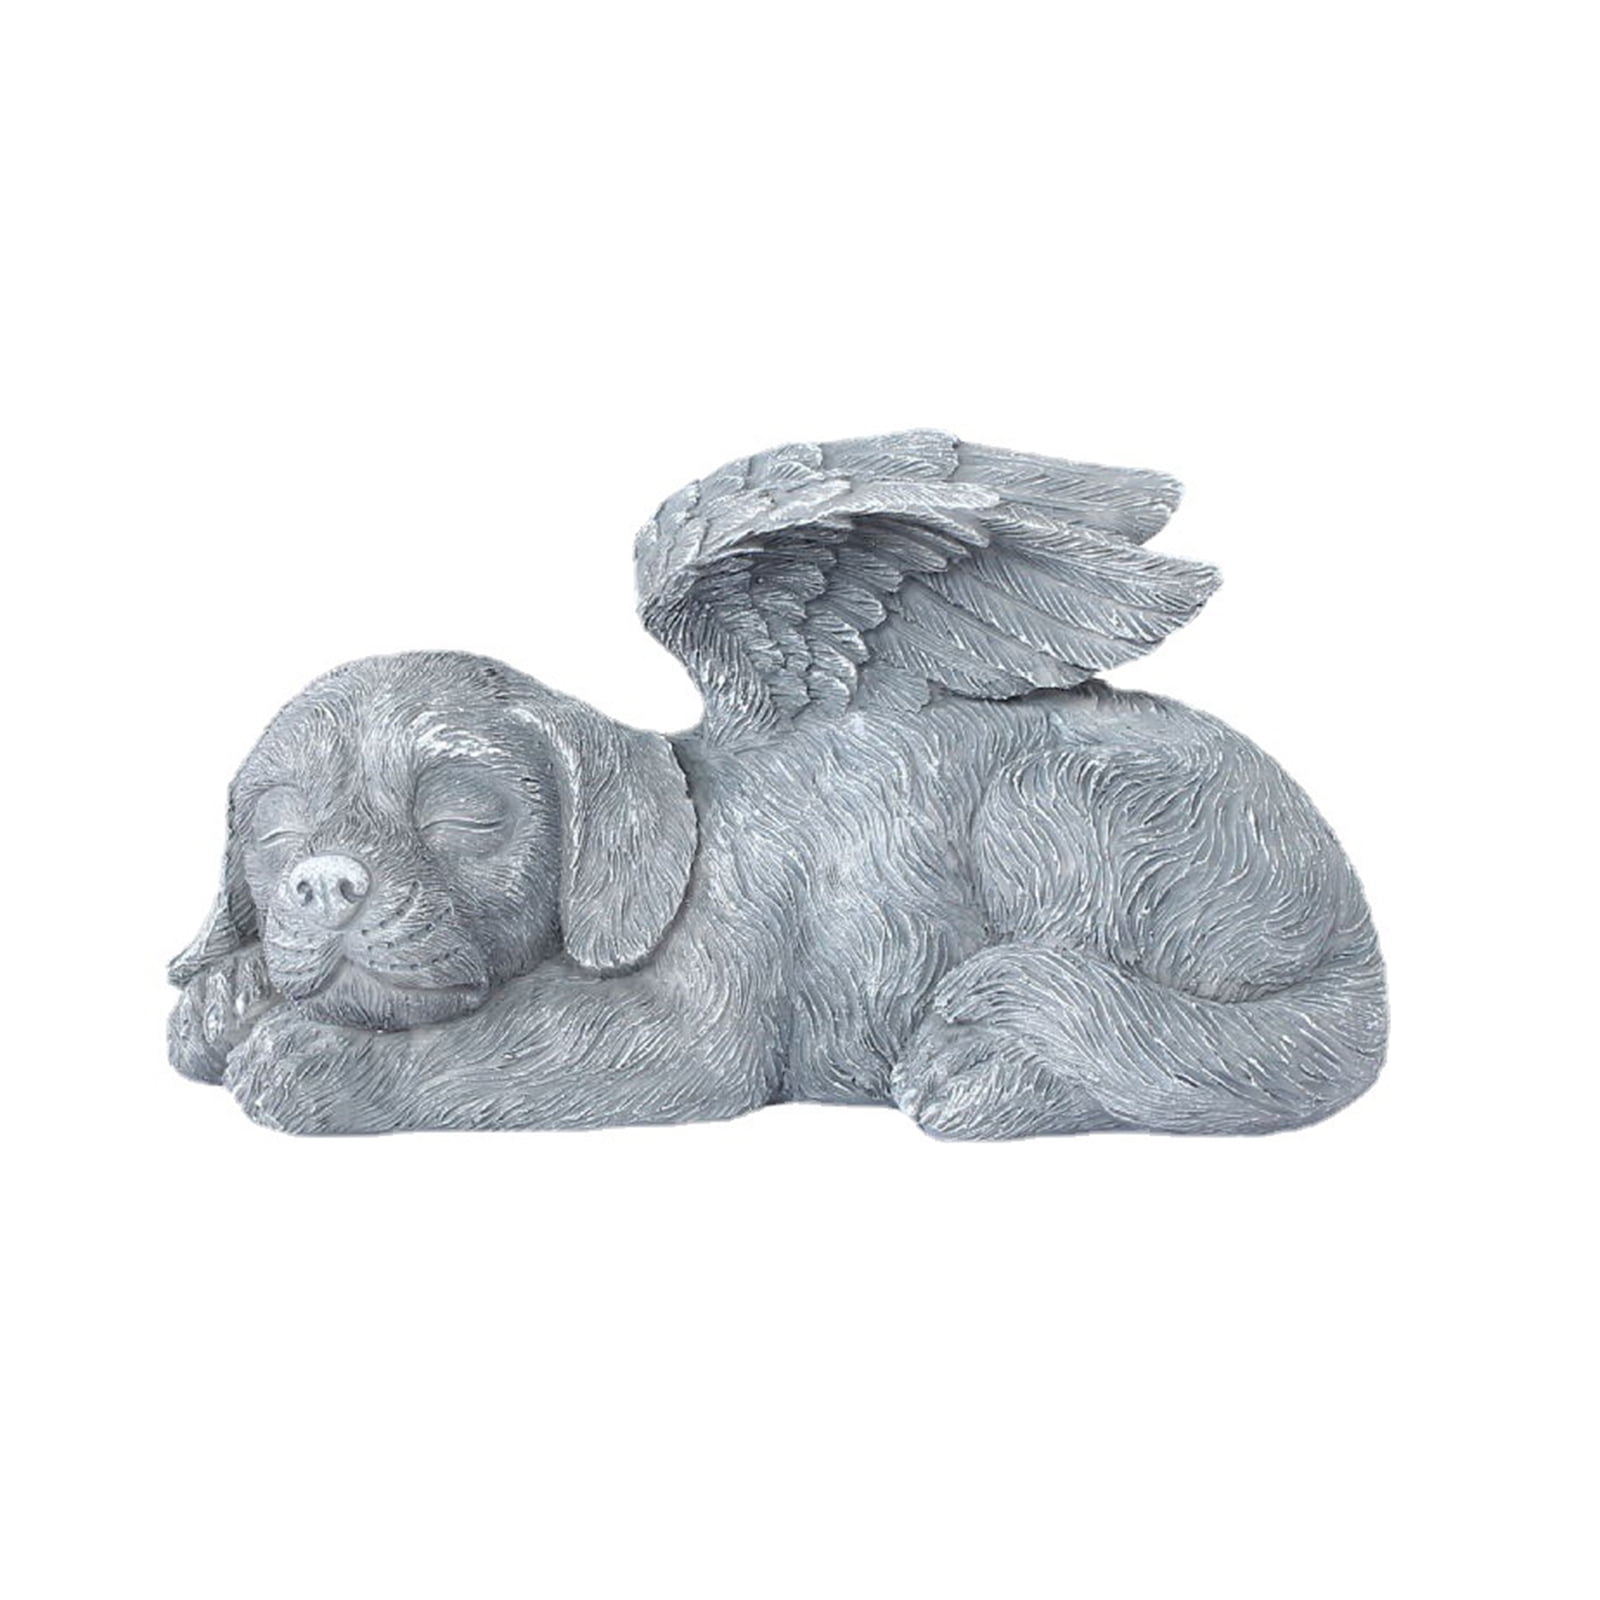 Angel Dog Cat Pet Memorial Statue Figurine or Cremation Urn Cemetery Grave Stone 